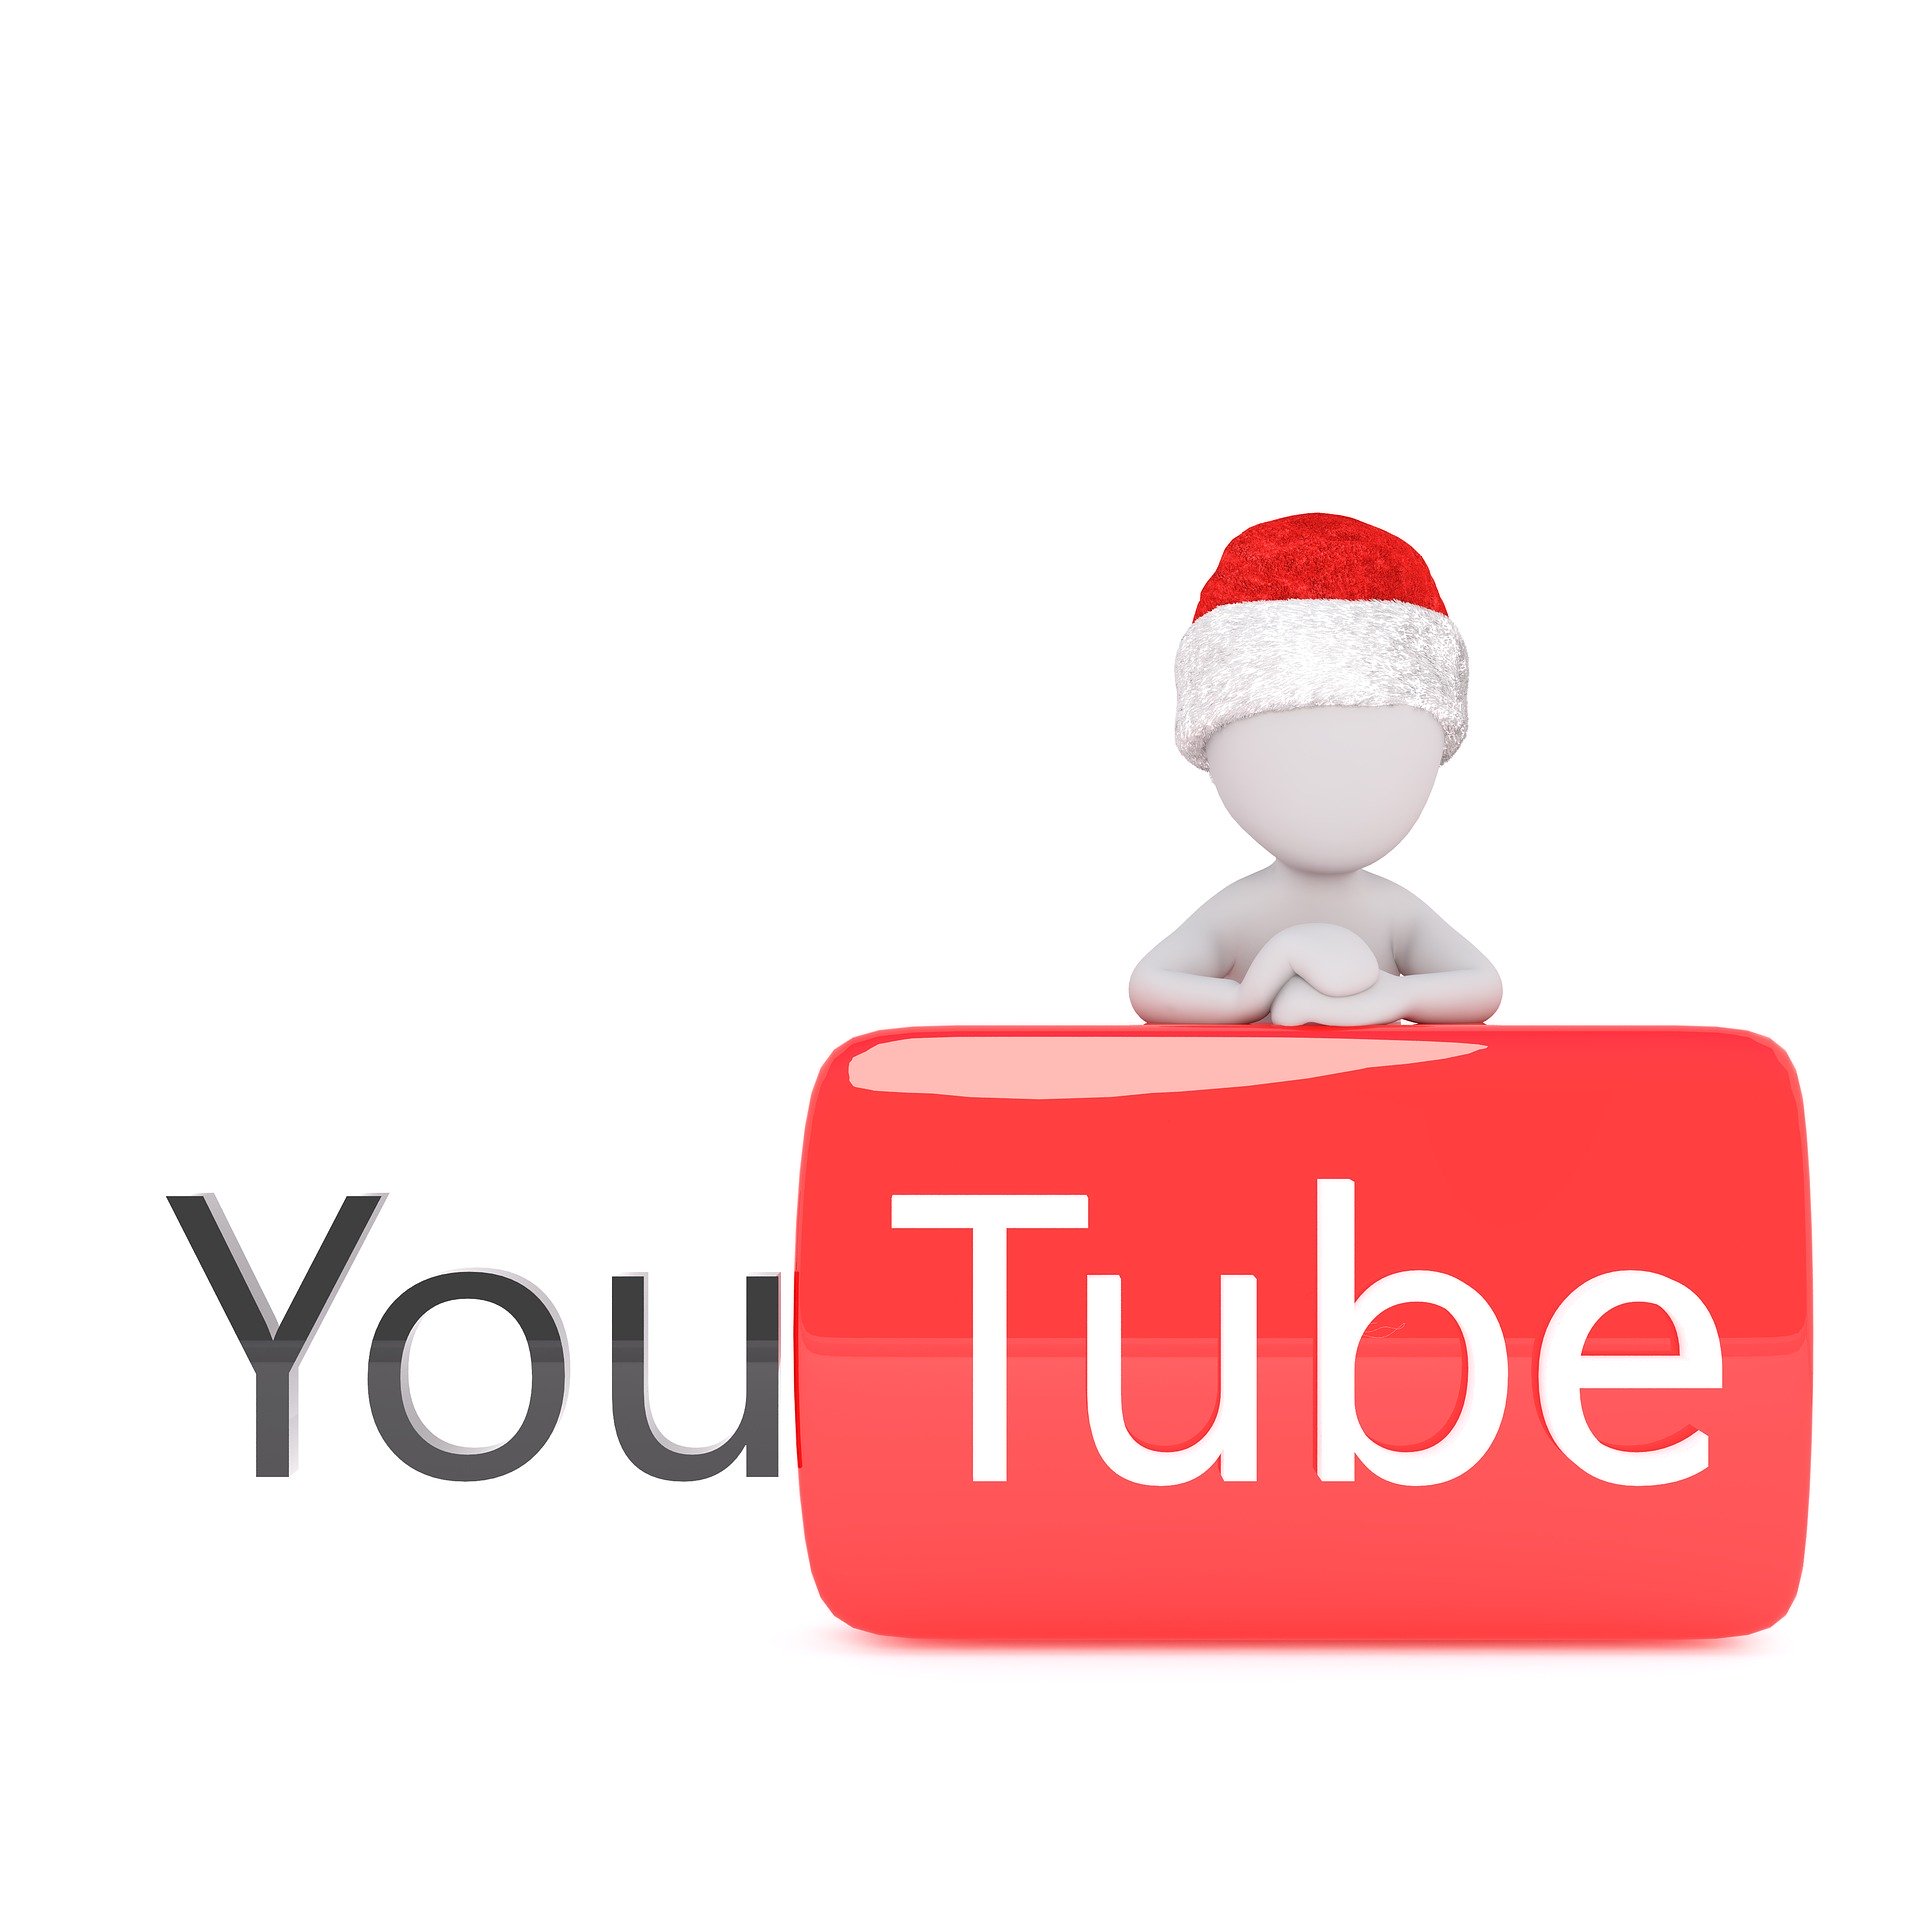 Youtube 収入 博之 宮迫